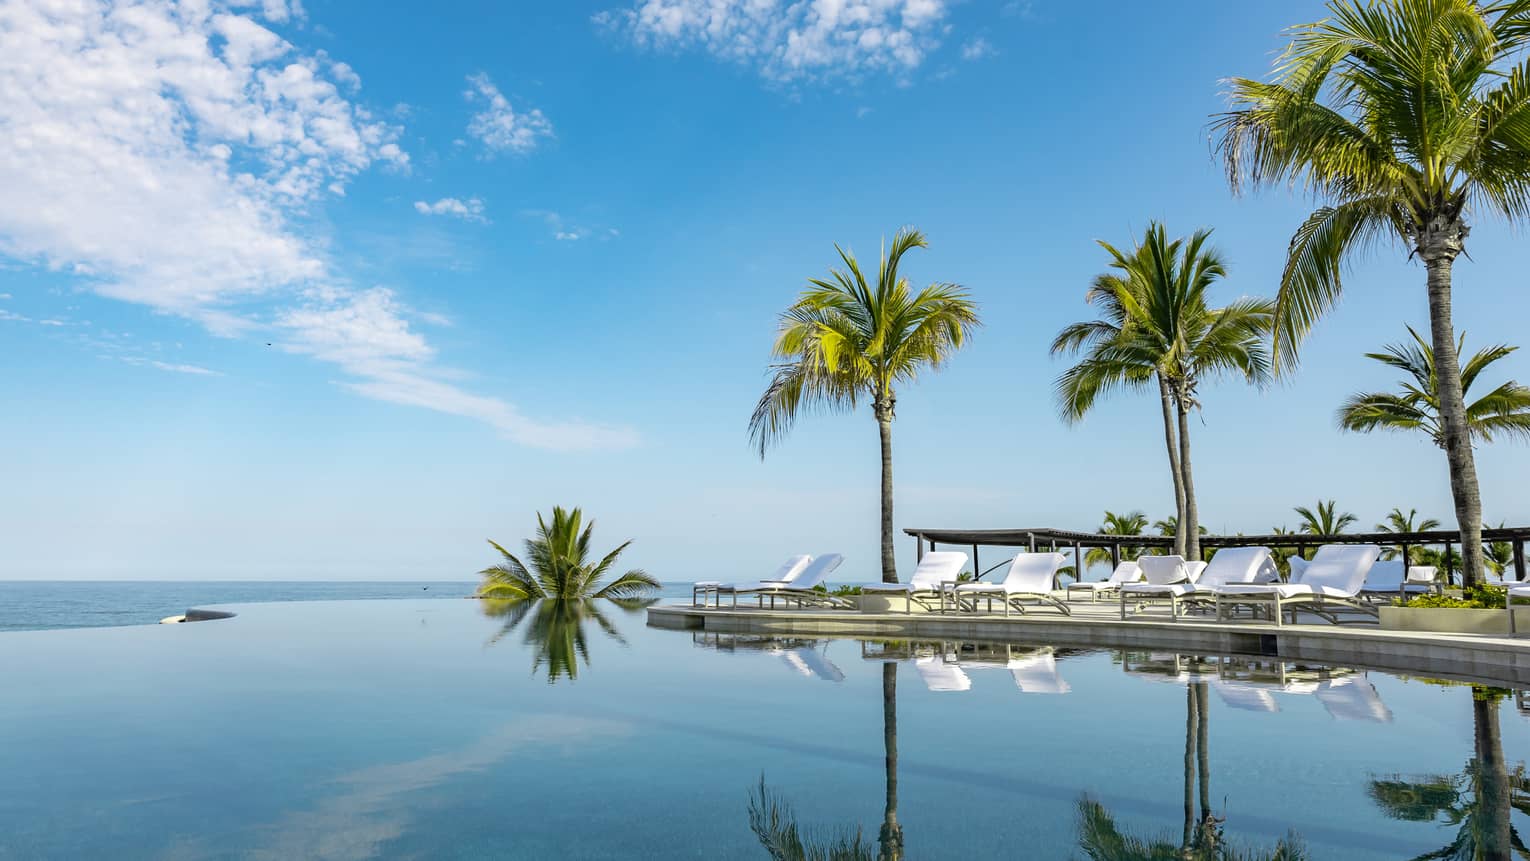 A calm infinity pool reflects the blue sky, clouds and palm trees